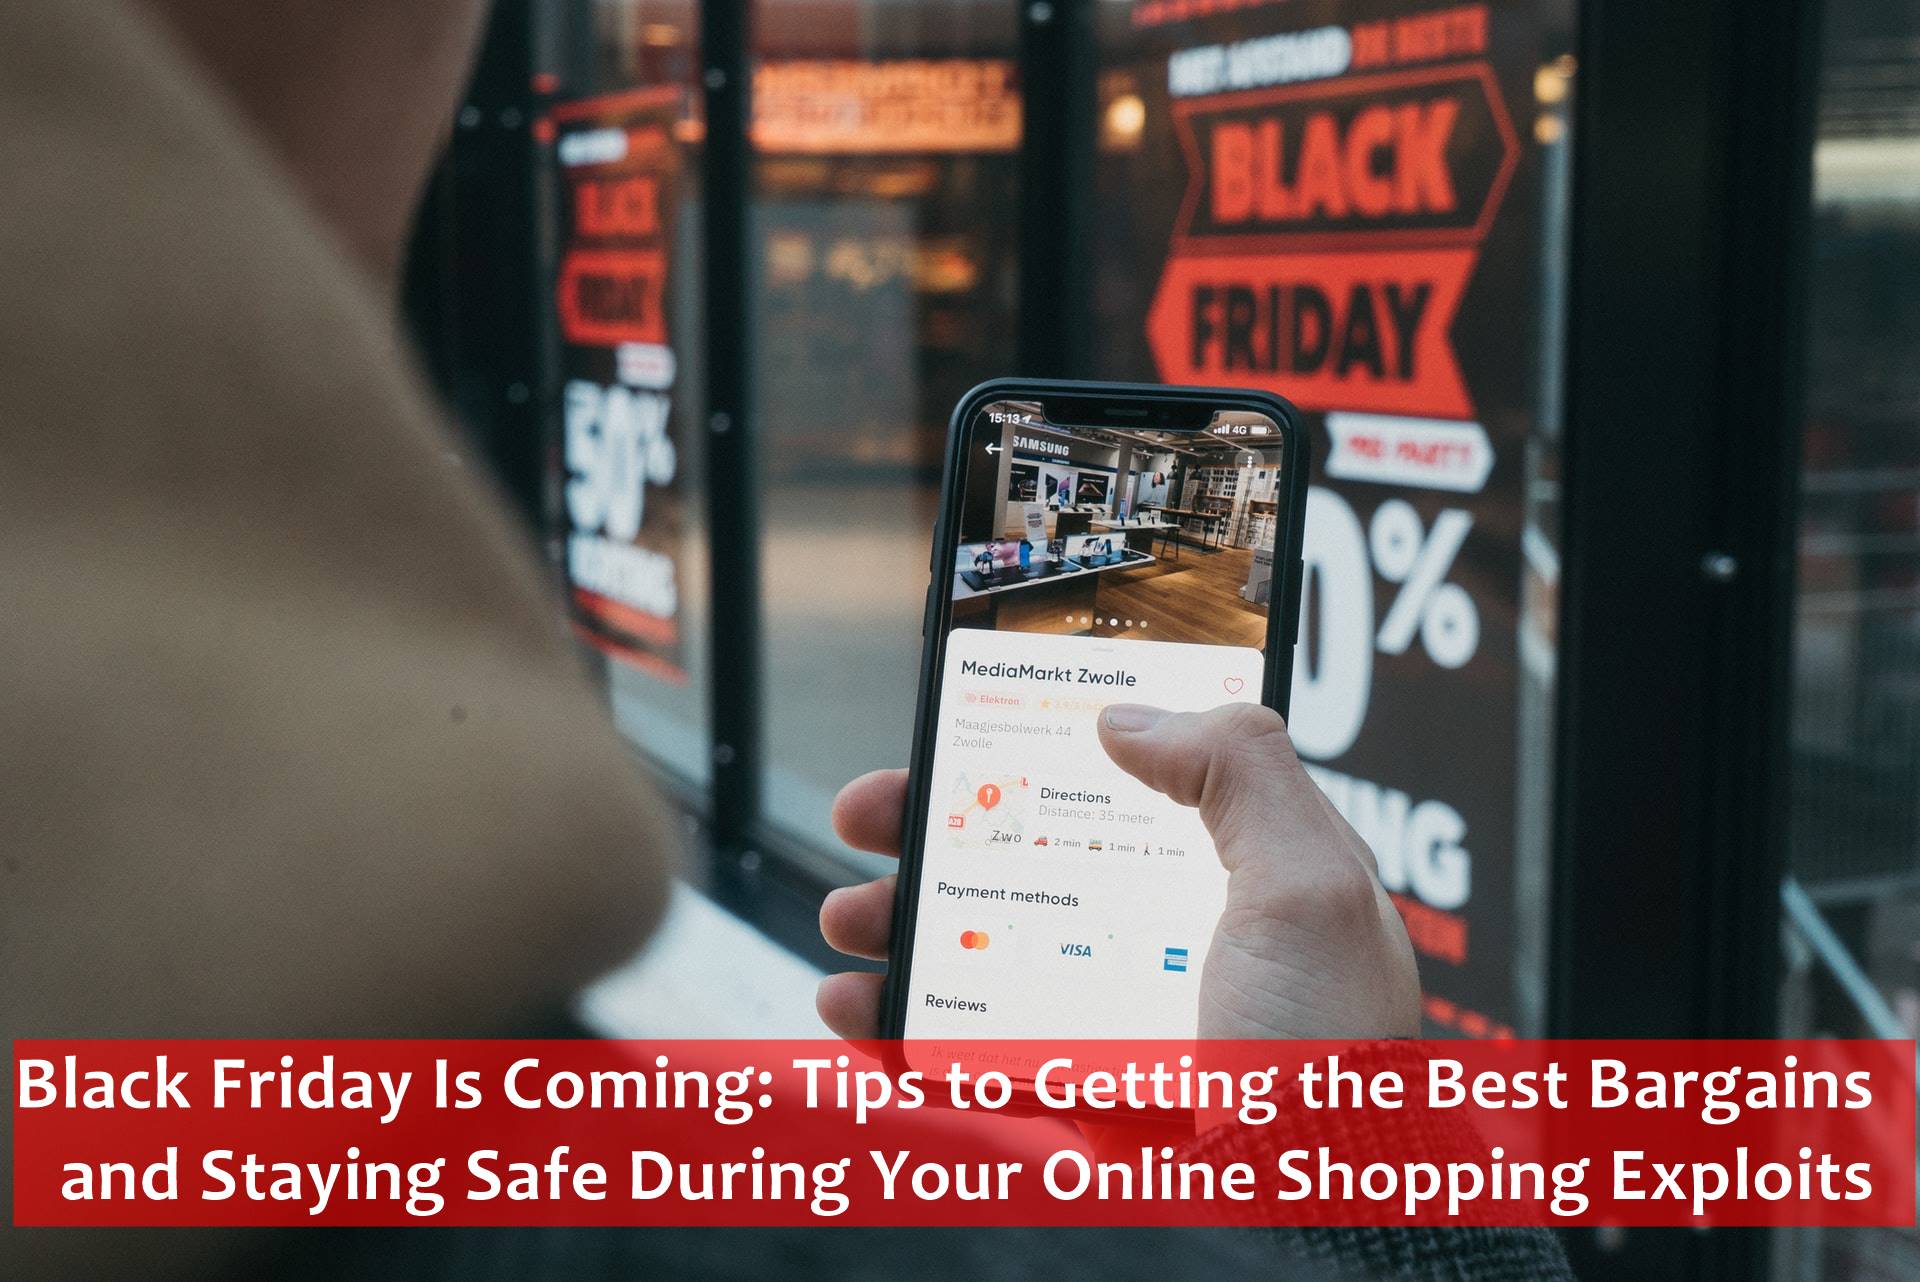 Black Friday Is Coming: Tips to Getting the Best Bargains and Staying Safe During Your Online Shopping Exploits